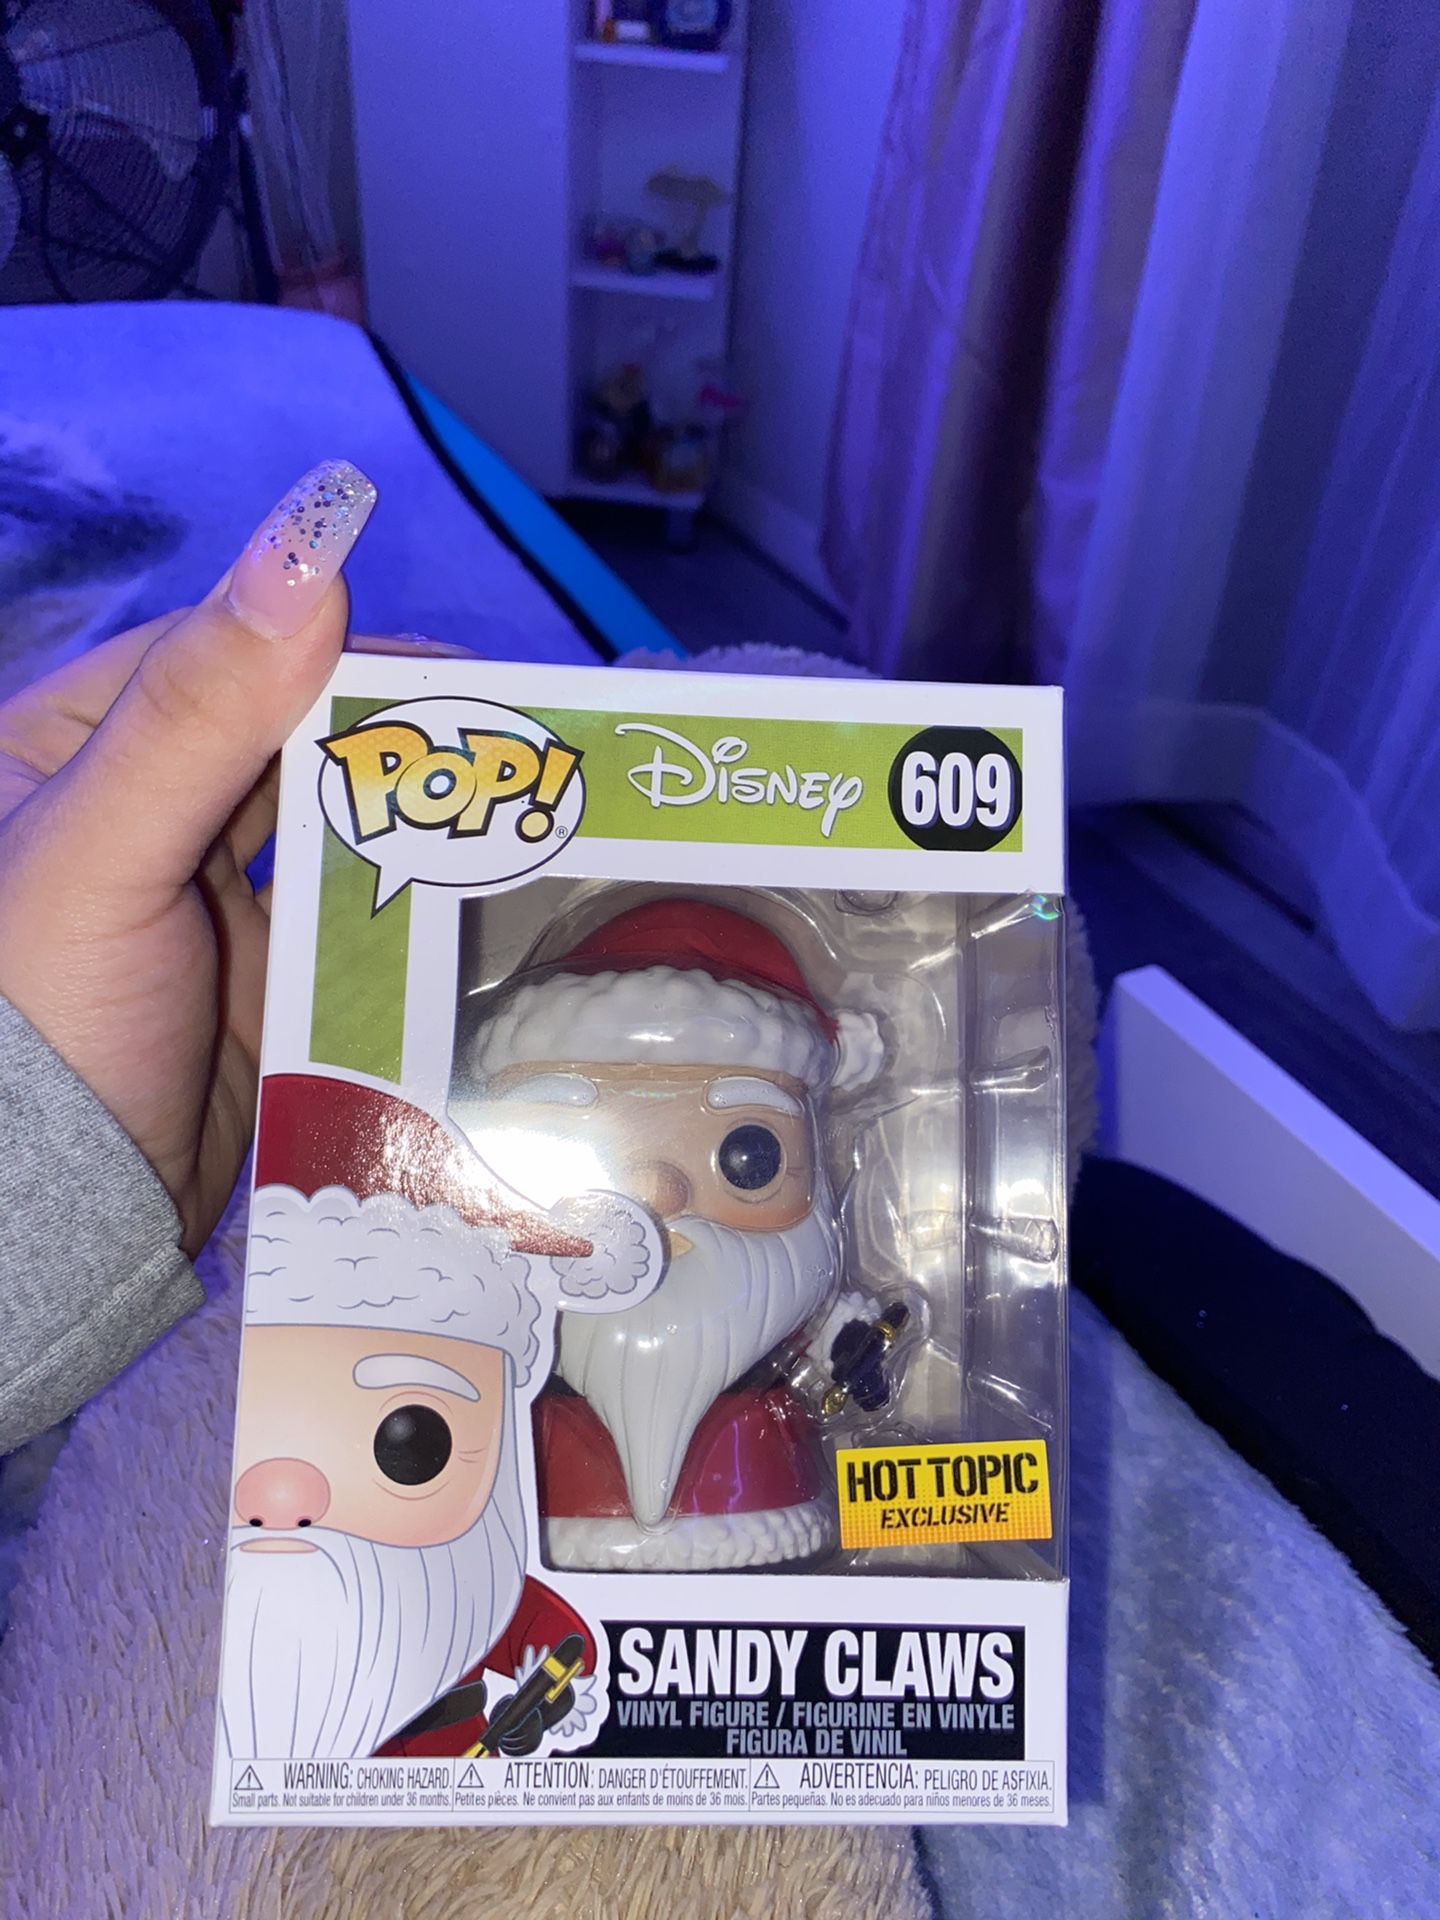 Sandy claws nightmare before Christmas